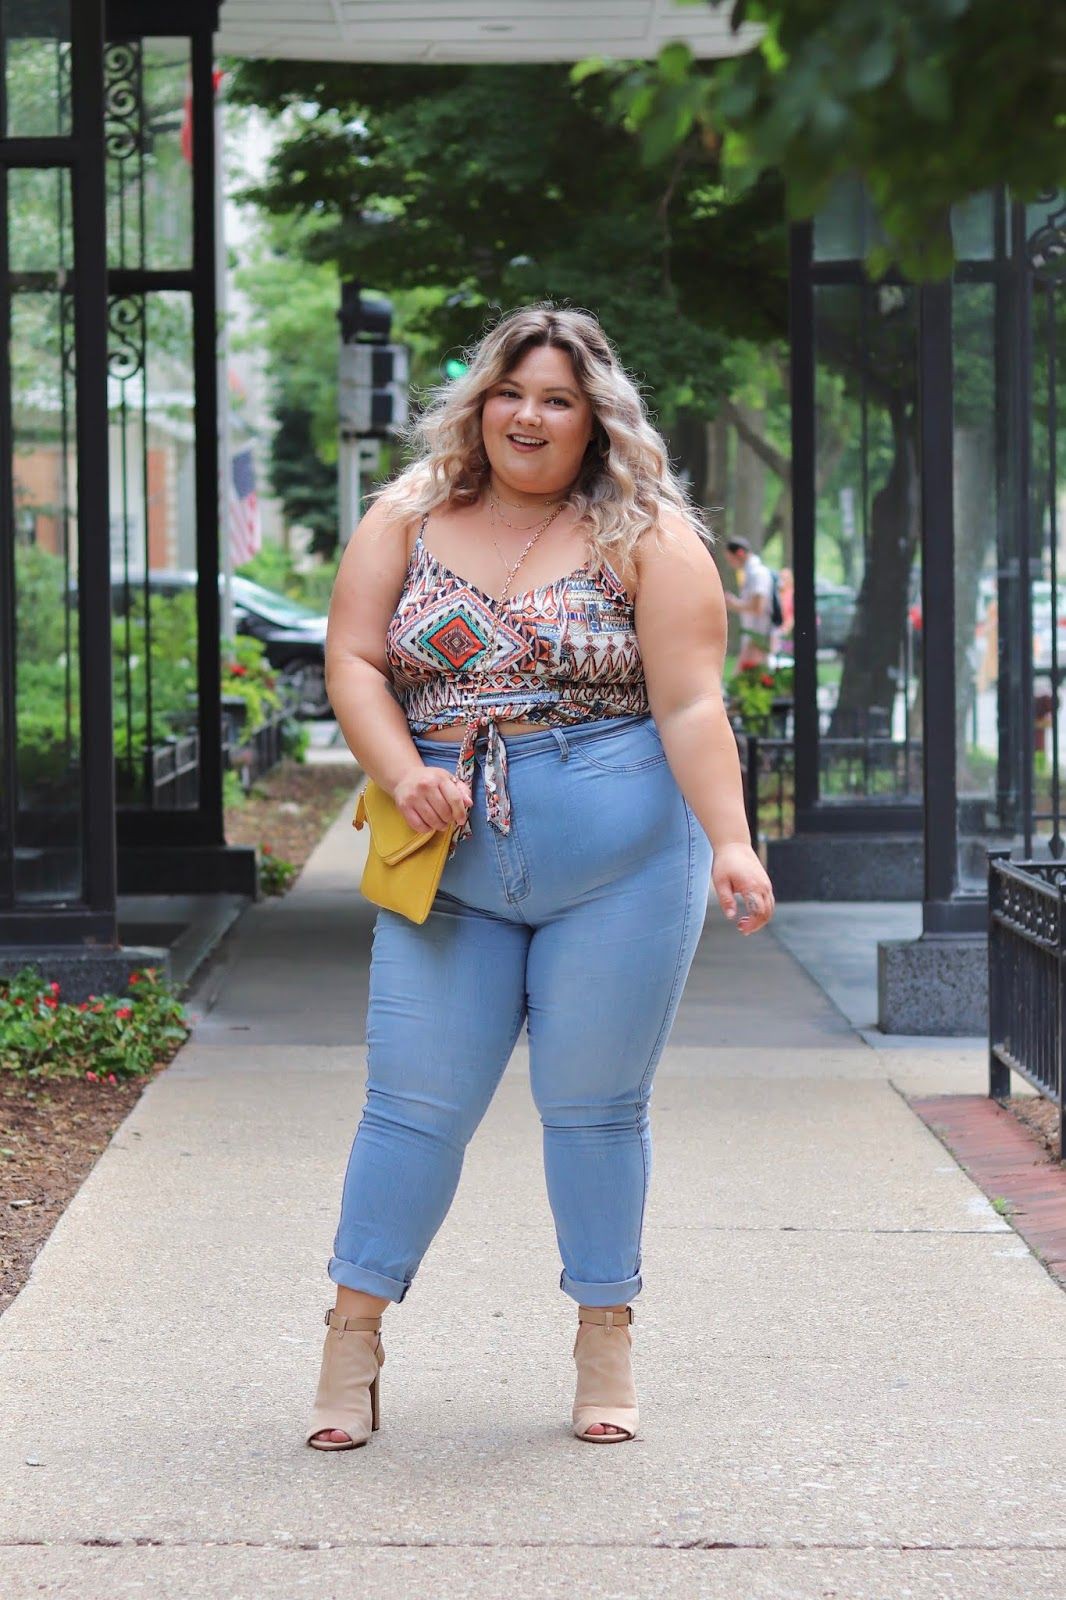 Crop Top Outfits Curvy Girl Crop Top Outfits Plus Size Addition Elle Crop Top Crop Top Outfits 